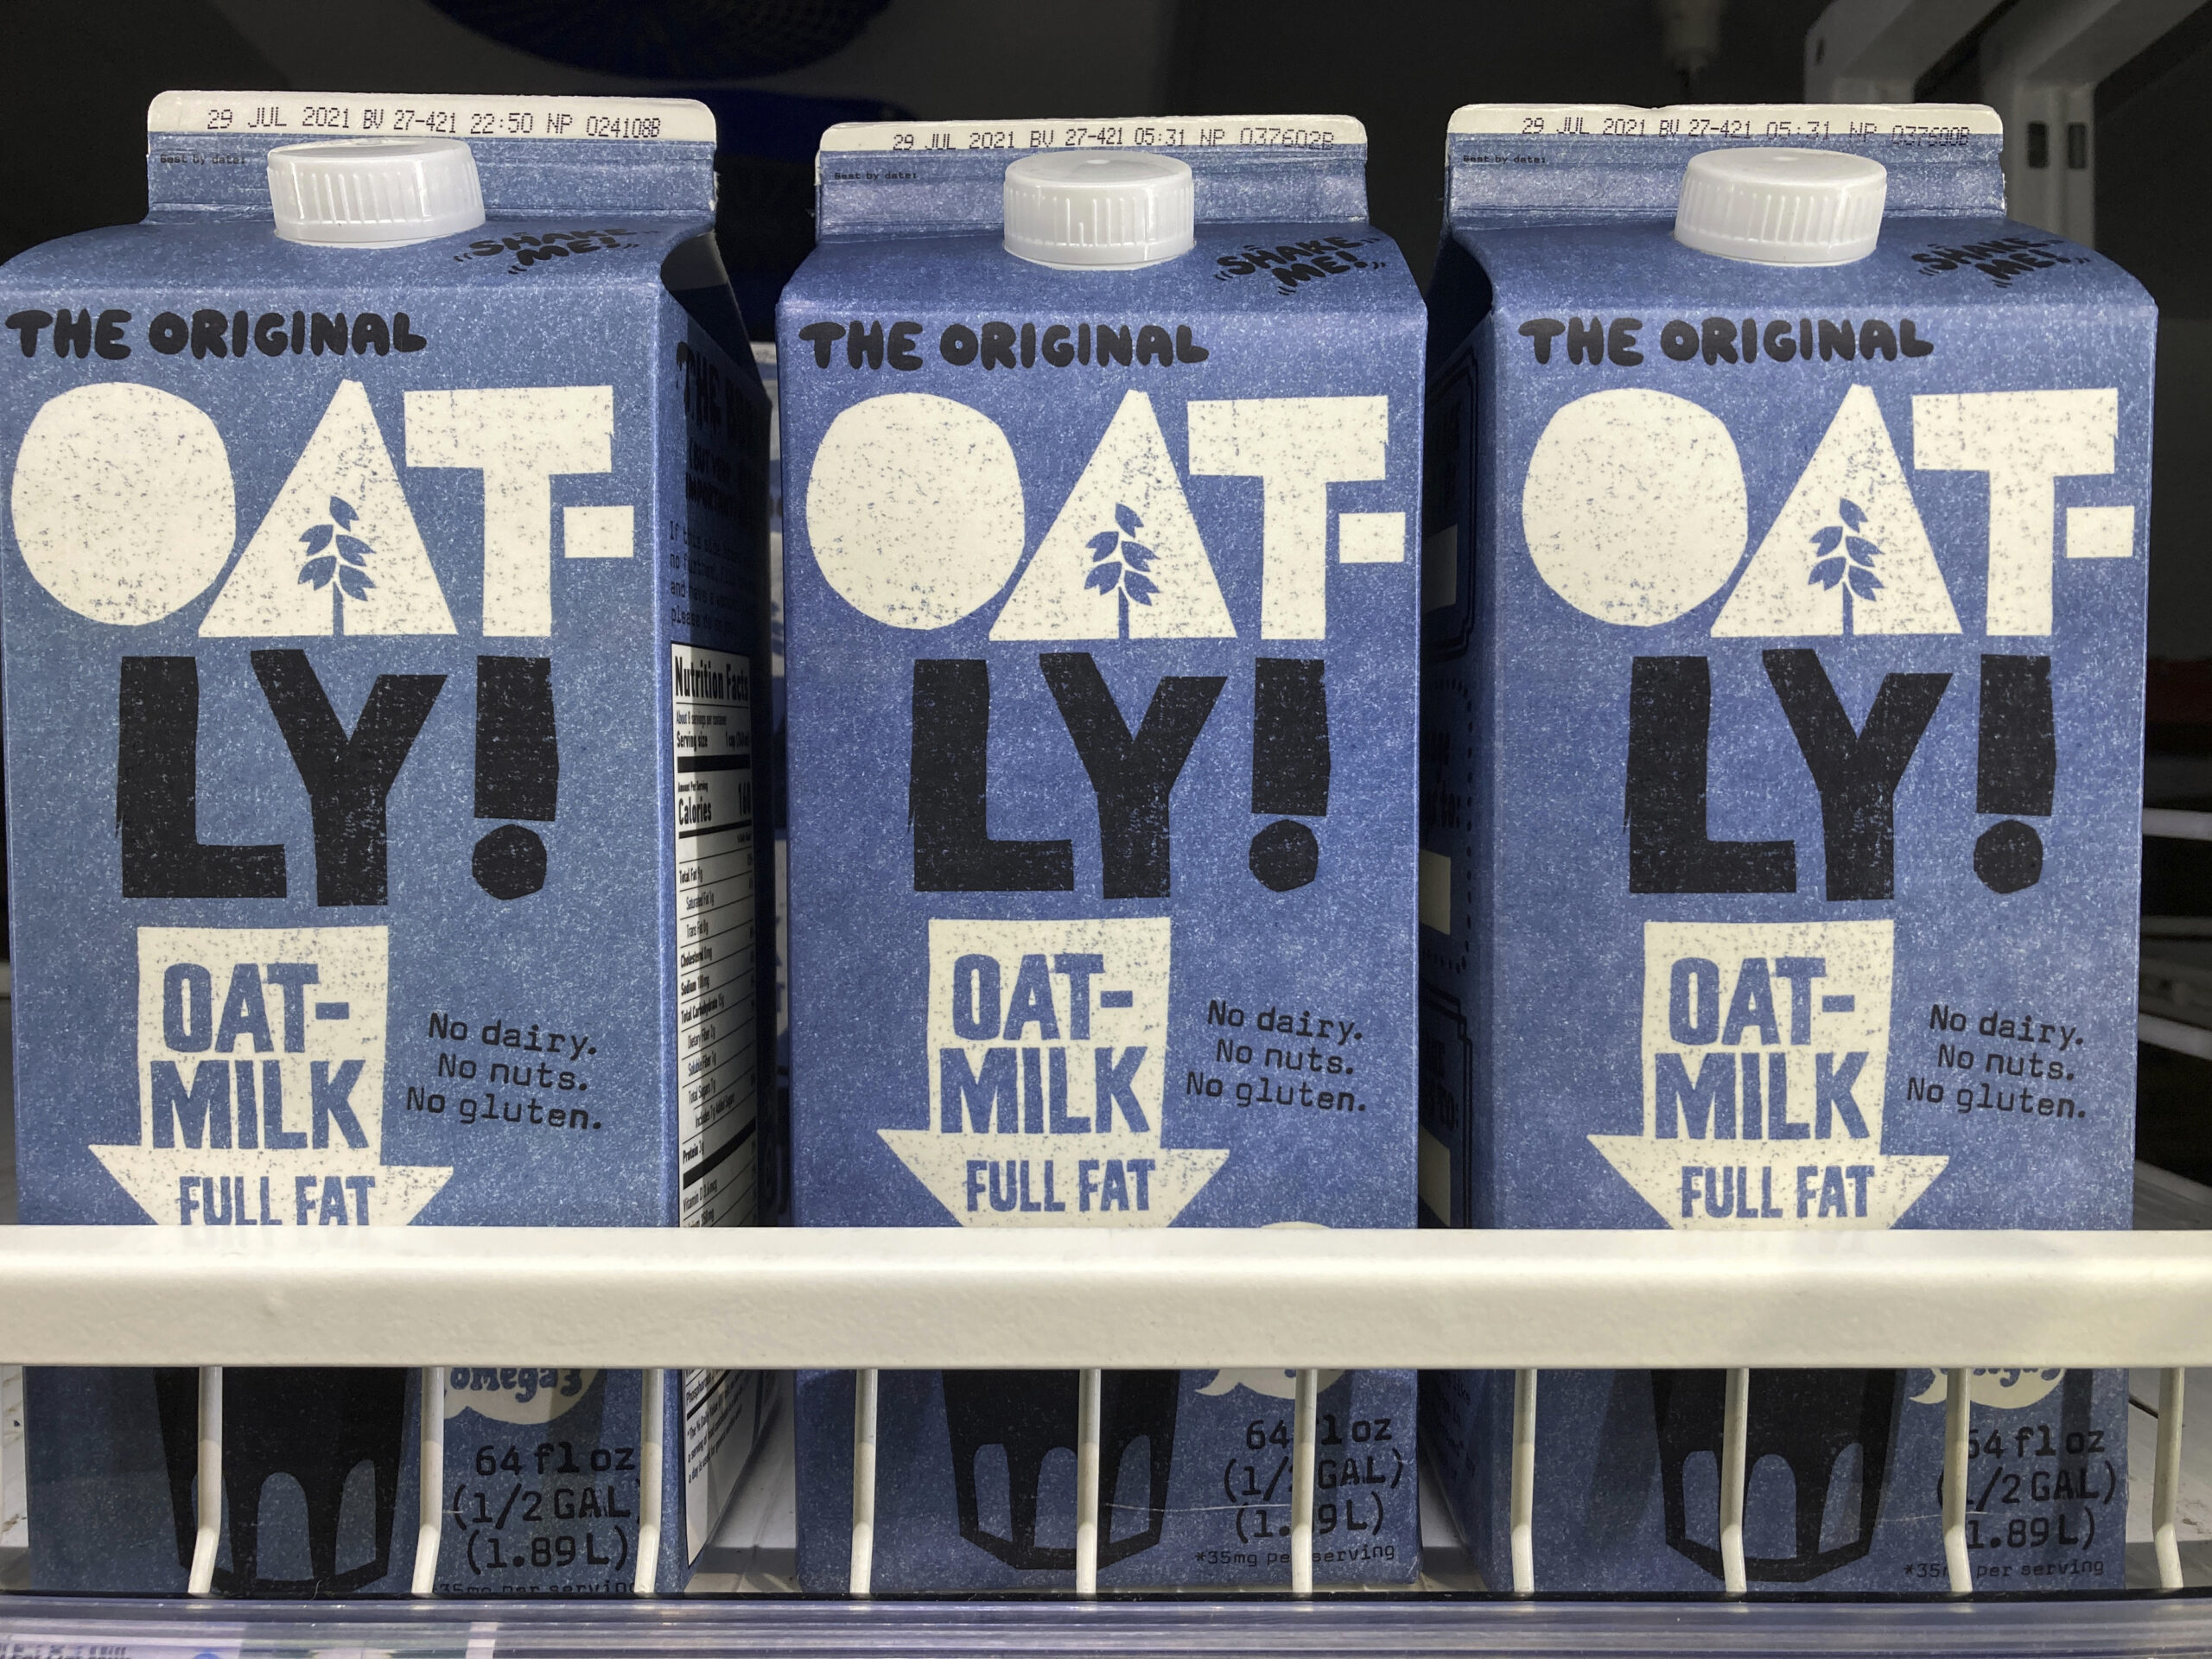 Oatly containers are displayed at a grocery store.